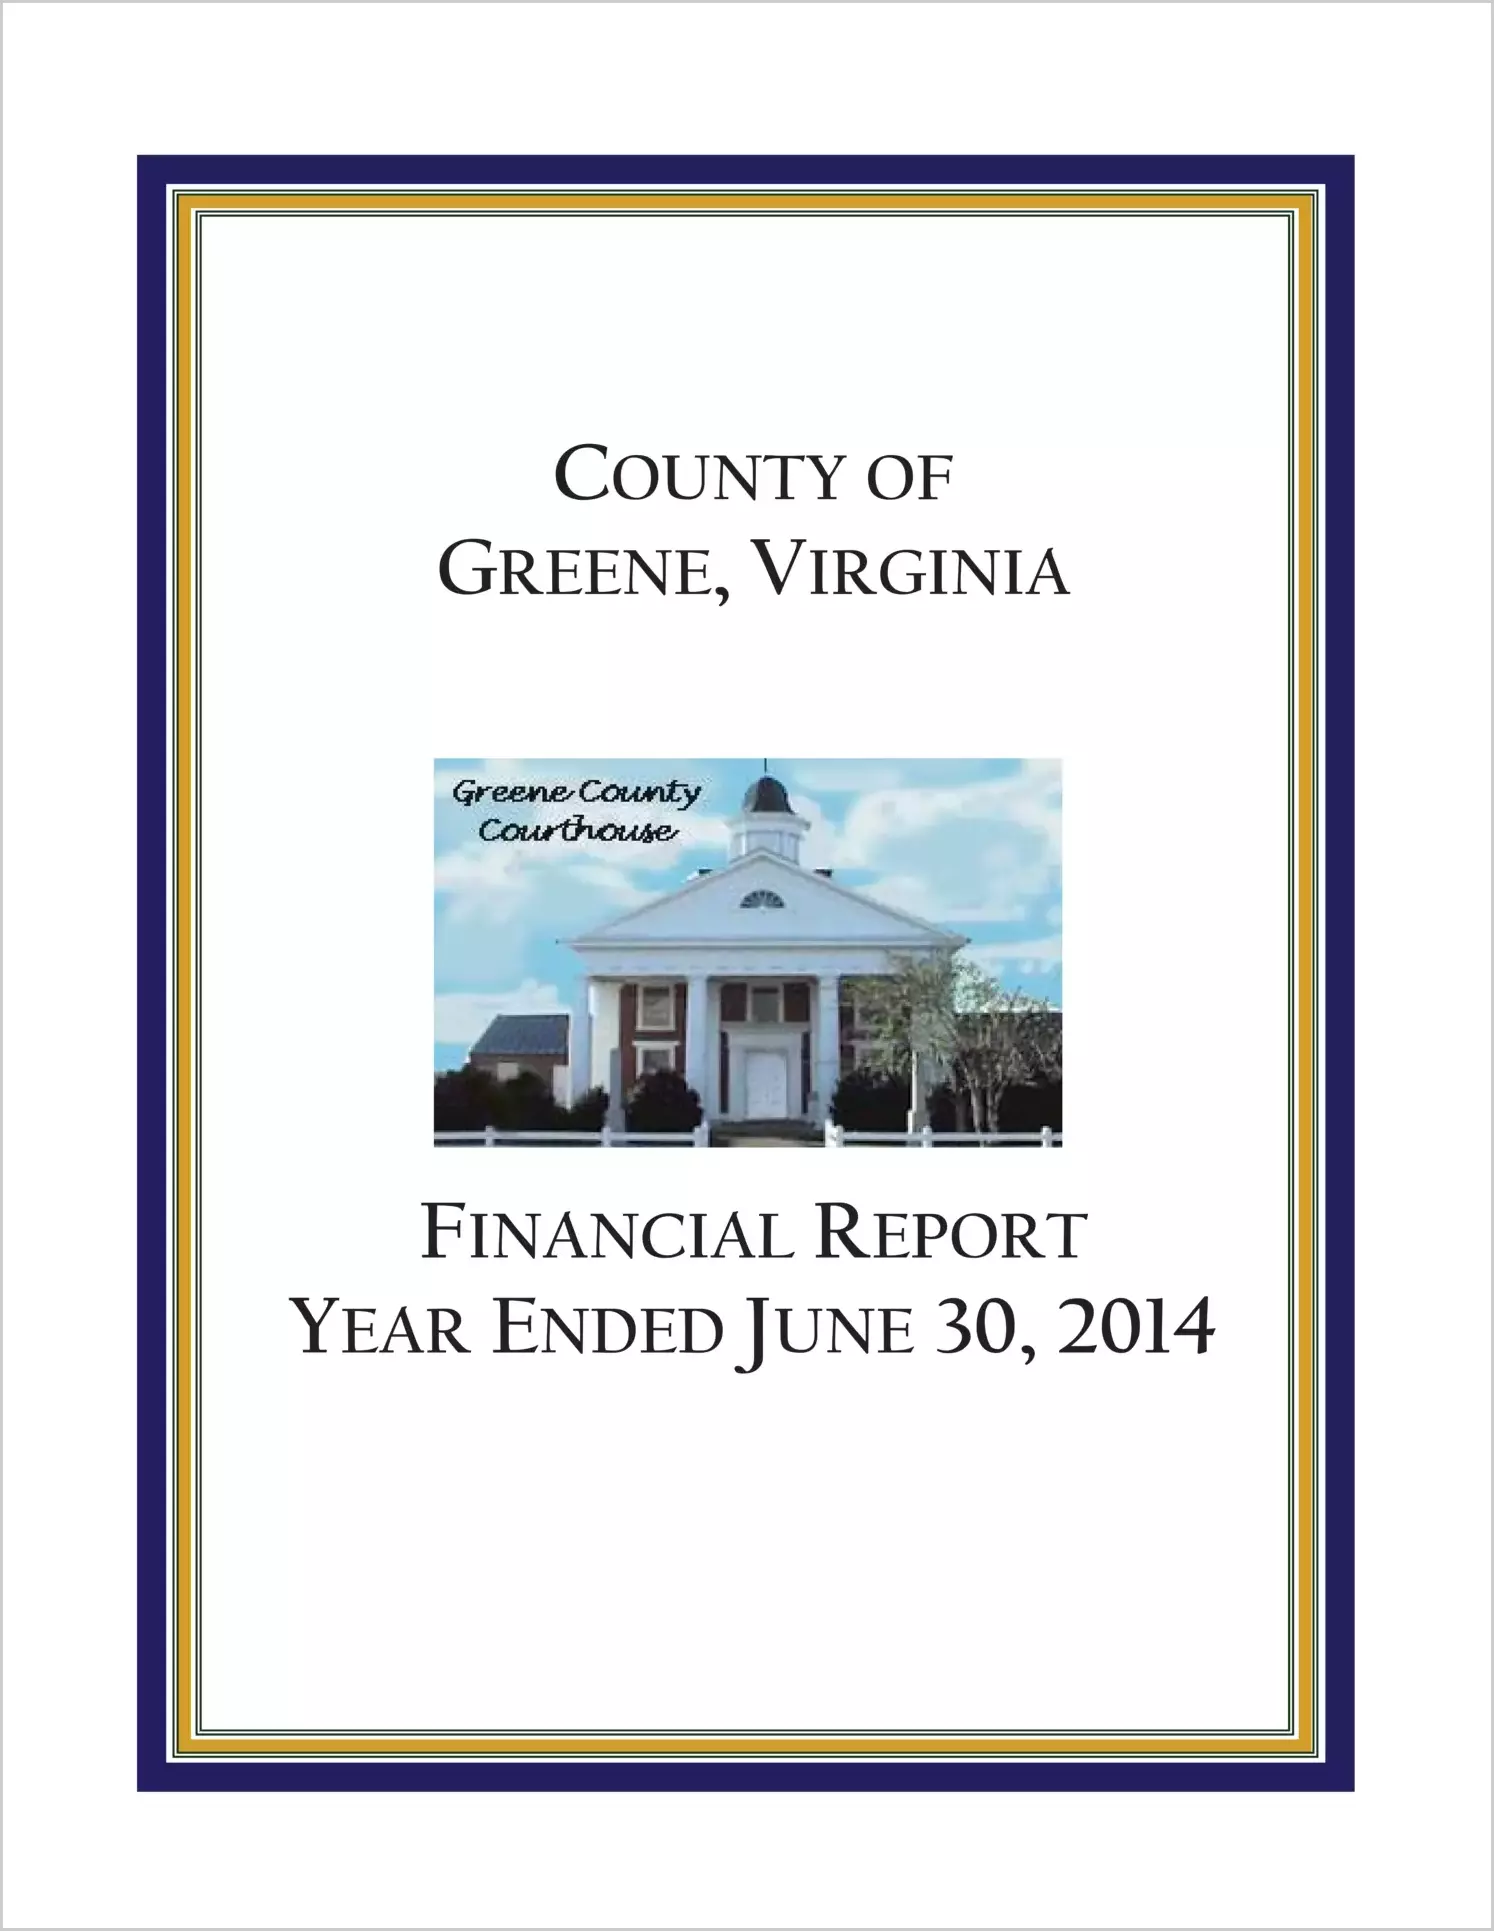 2014 Annual Financial Report for County of Greene